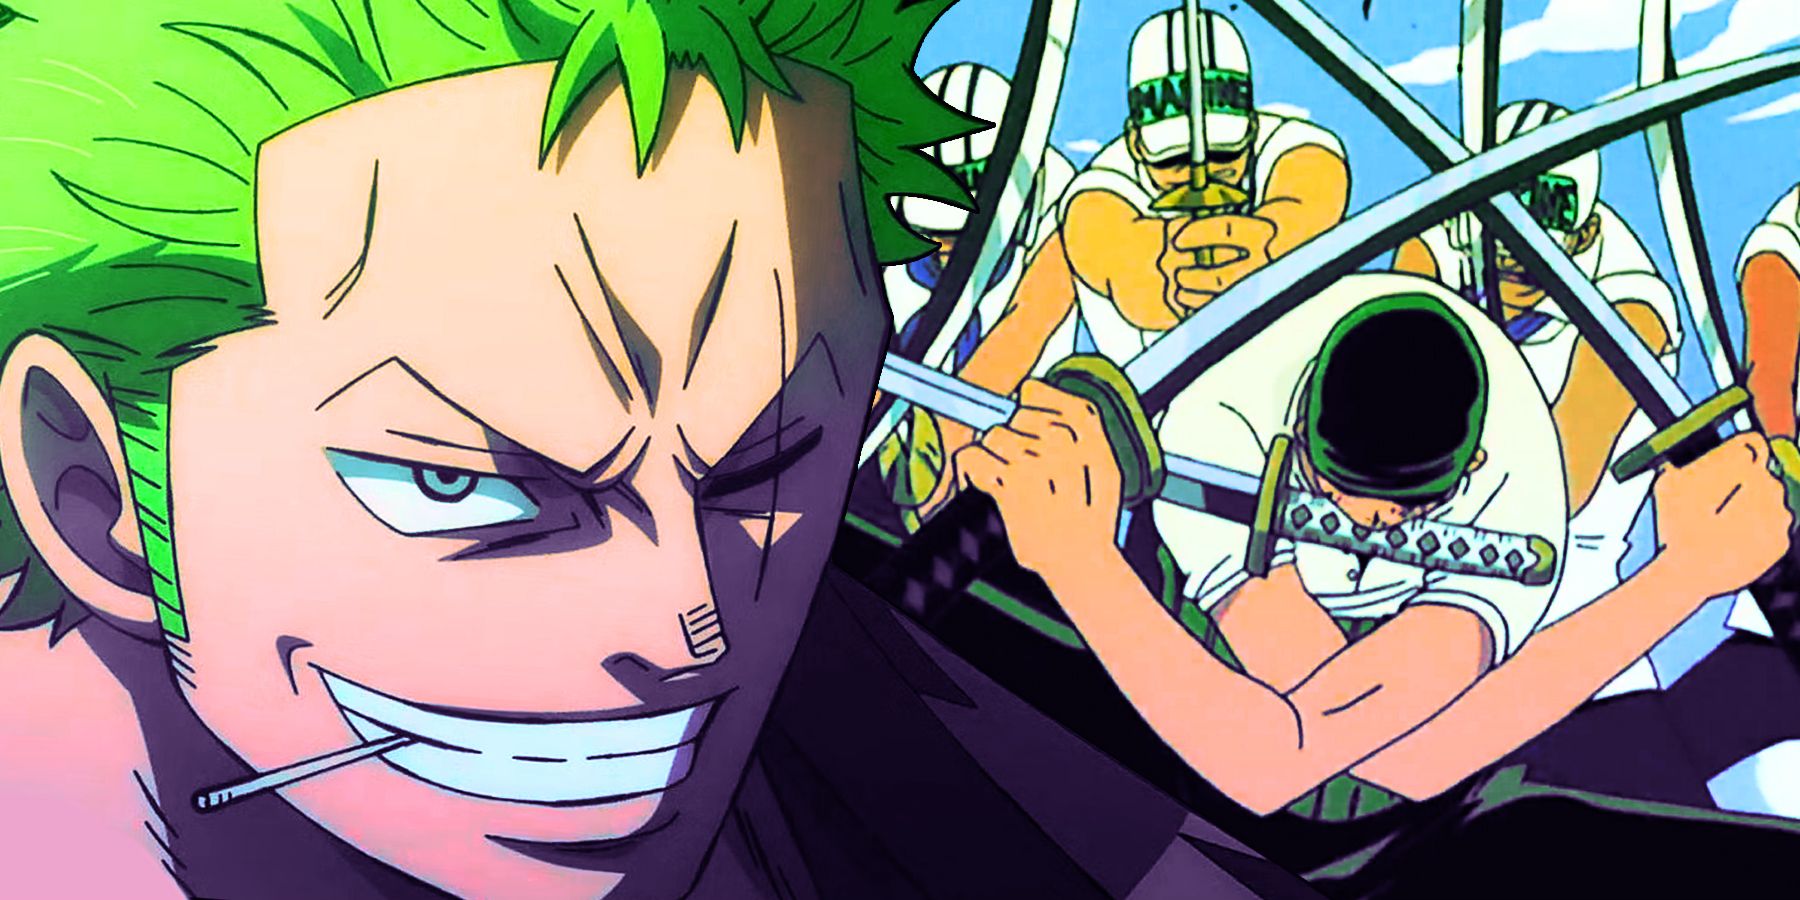 Why does Zoro always forget his sense of direction? - Quora